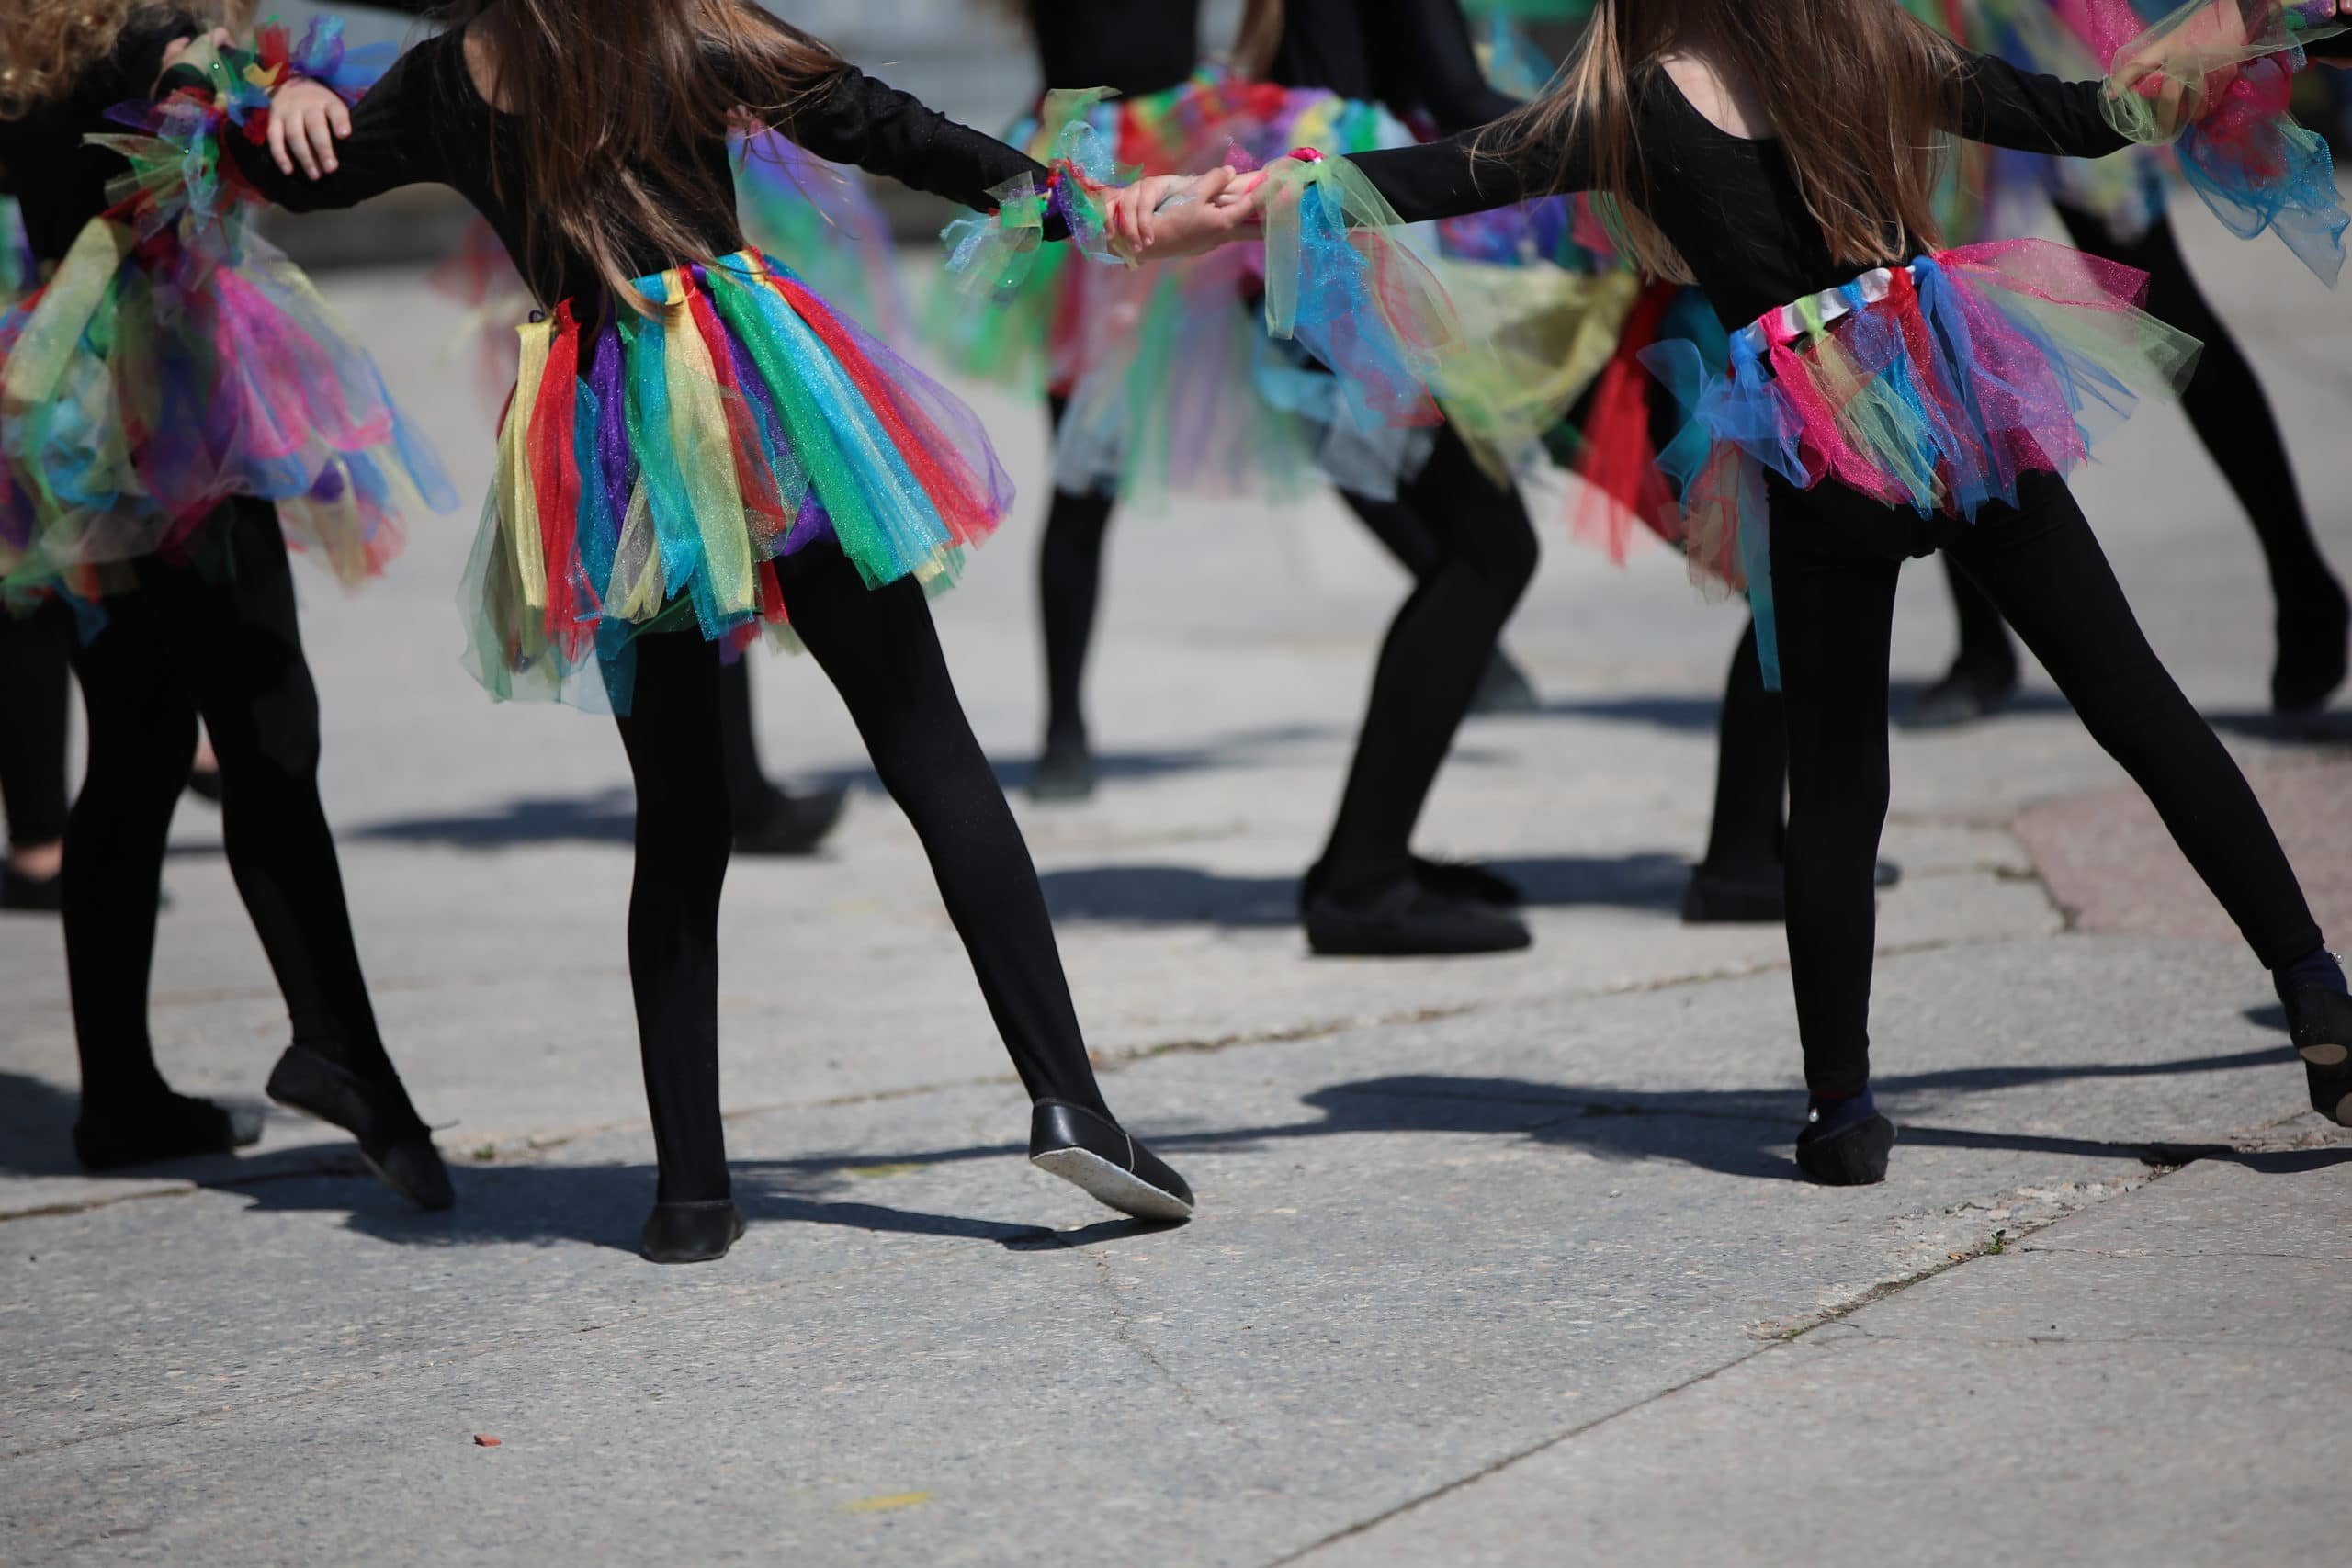 Group of little children in colorful costumes dancing at the outdoor festival on a summer day